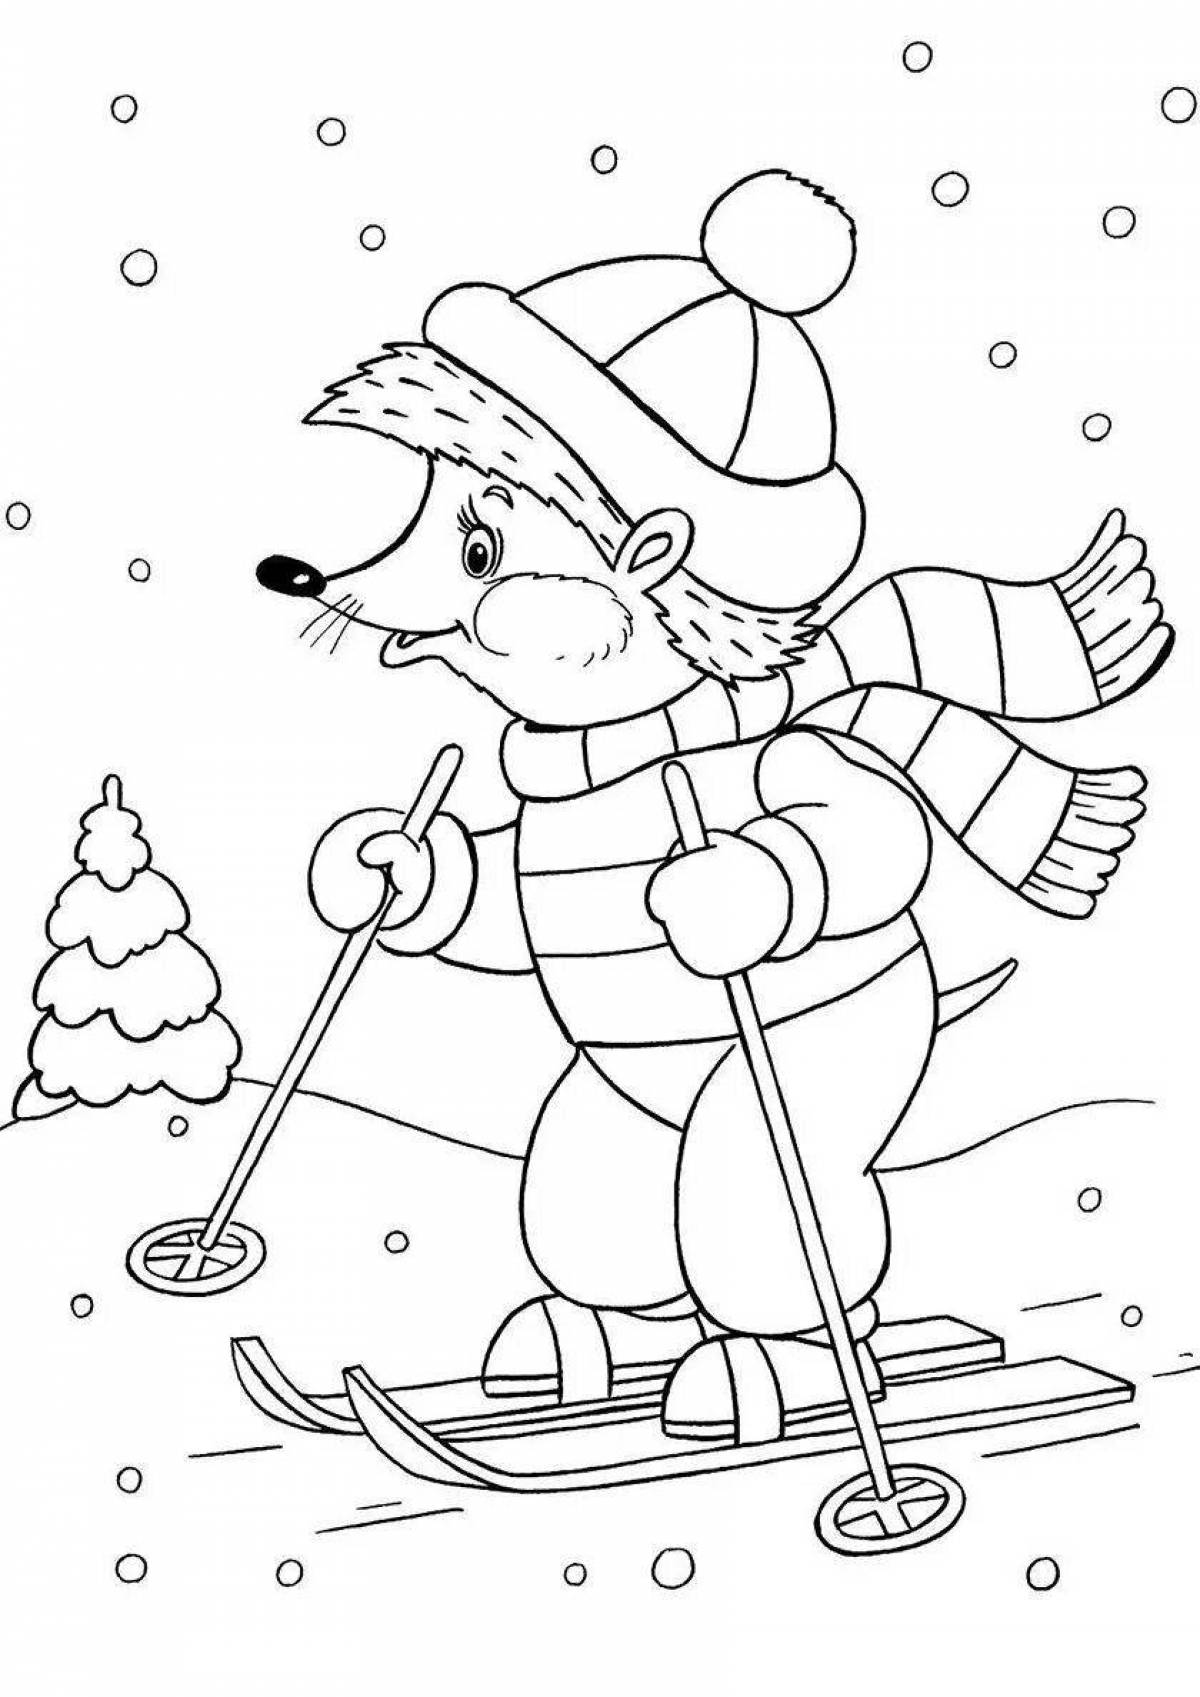 Wonderful winter coloring for children 2-3 years old